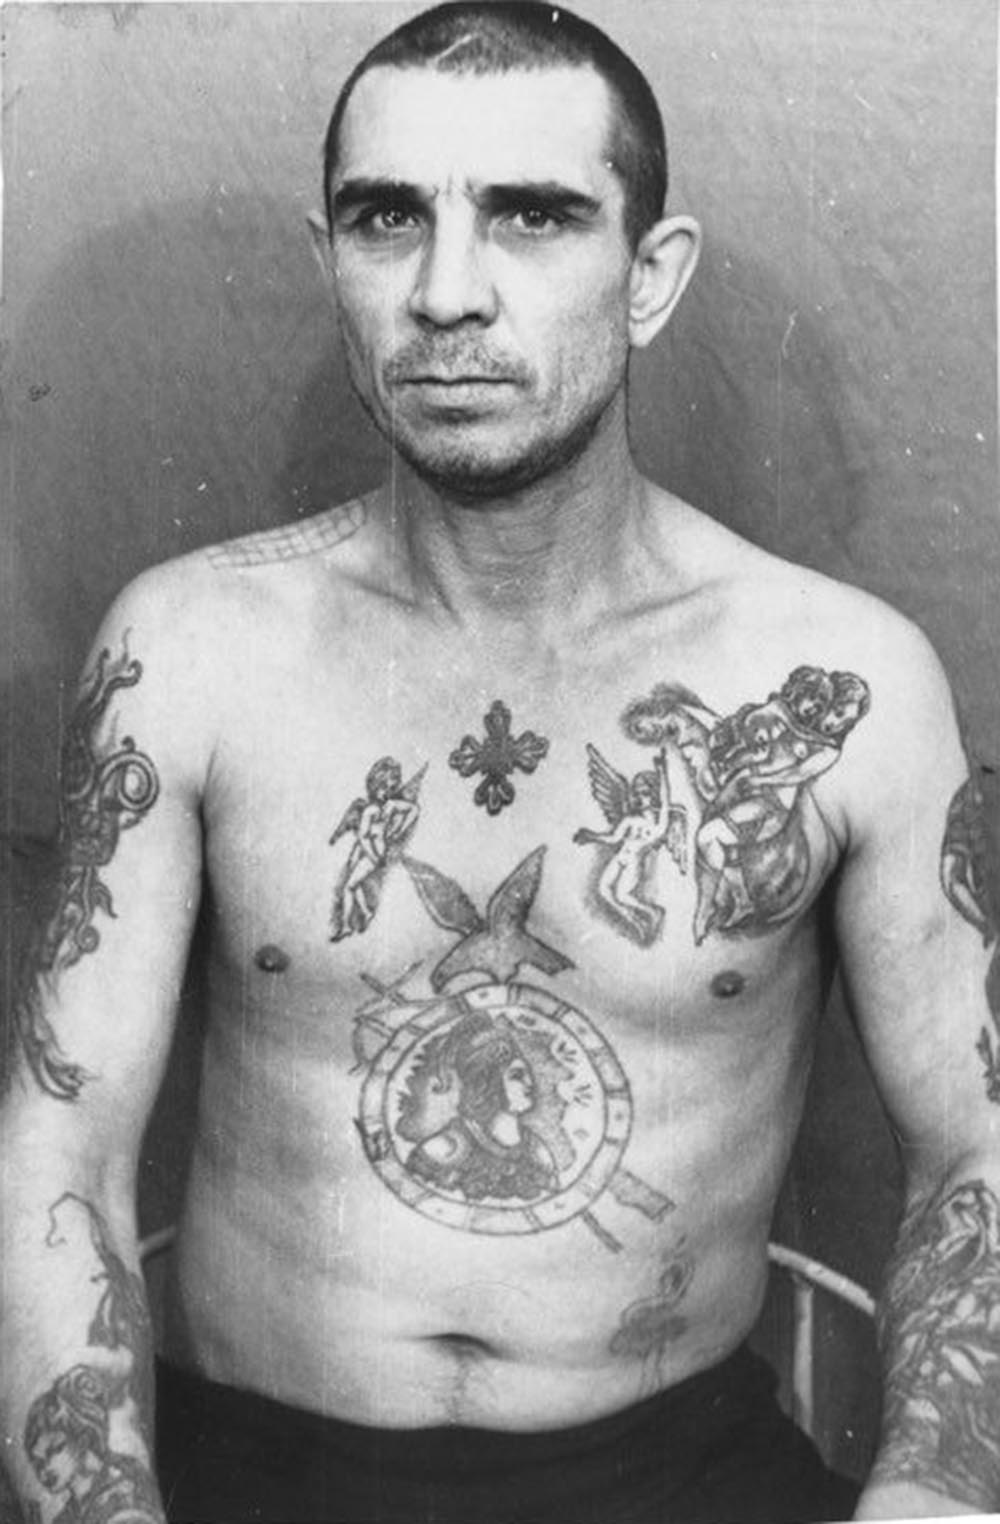 The tattoos on this inmate mimic those of higher ranking criminals. They indicate the bearer has adopted a thief's mentality. However, he does not wear the 'thief's stars;' he is not a 'vor v zakone' or 'thief-in-law,' and therefore holds no real power among this caste.